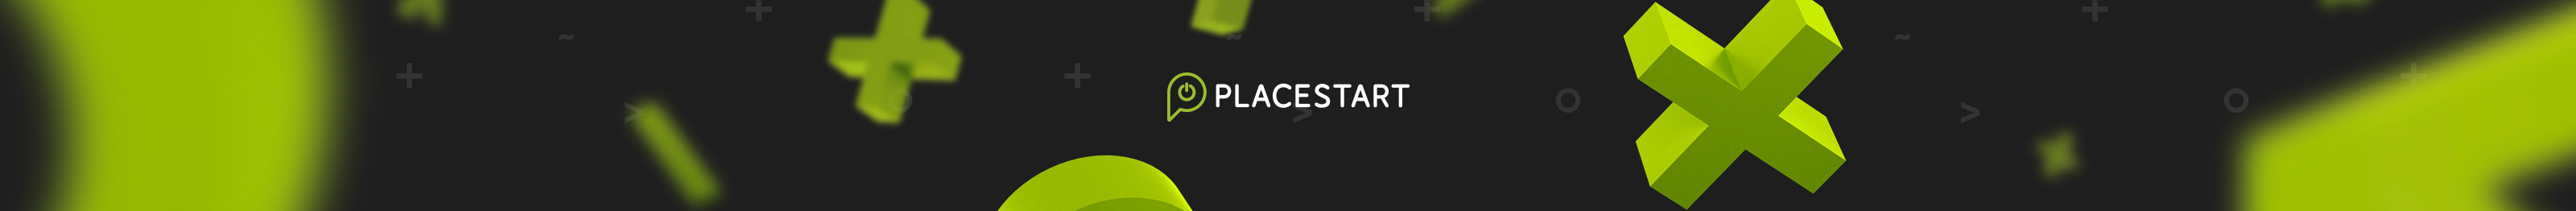 PLACE START's profile banner